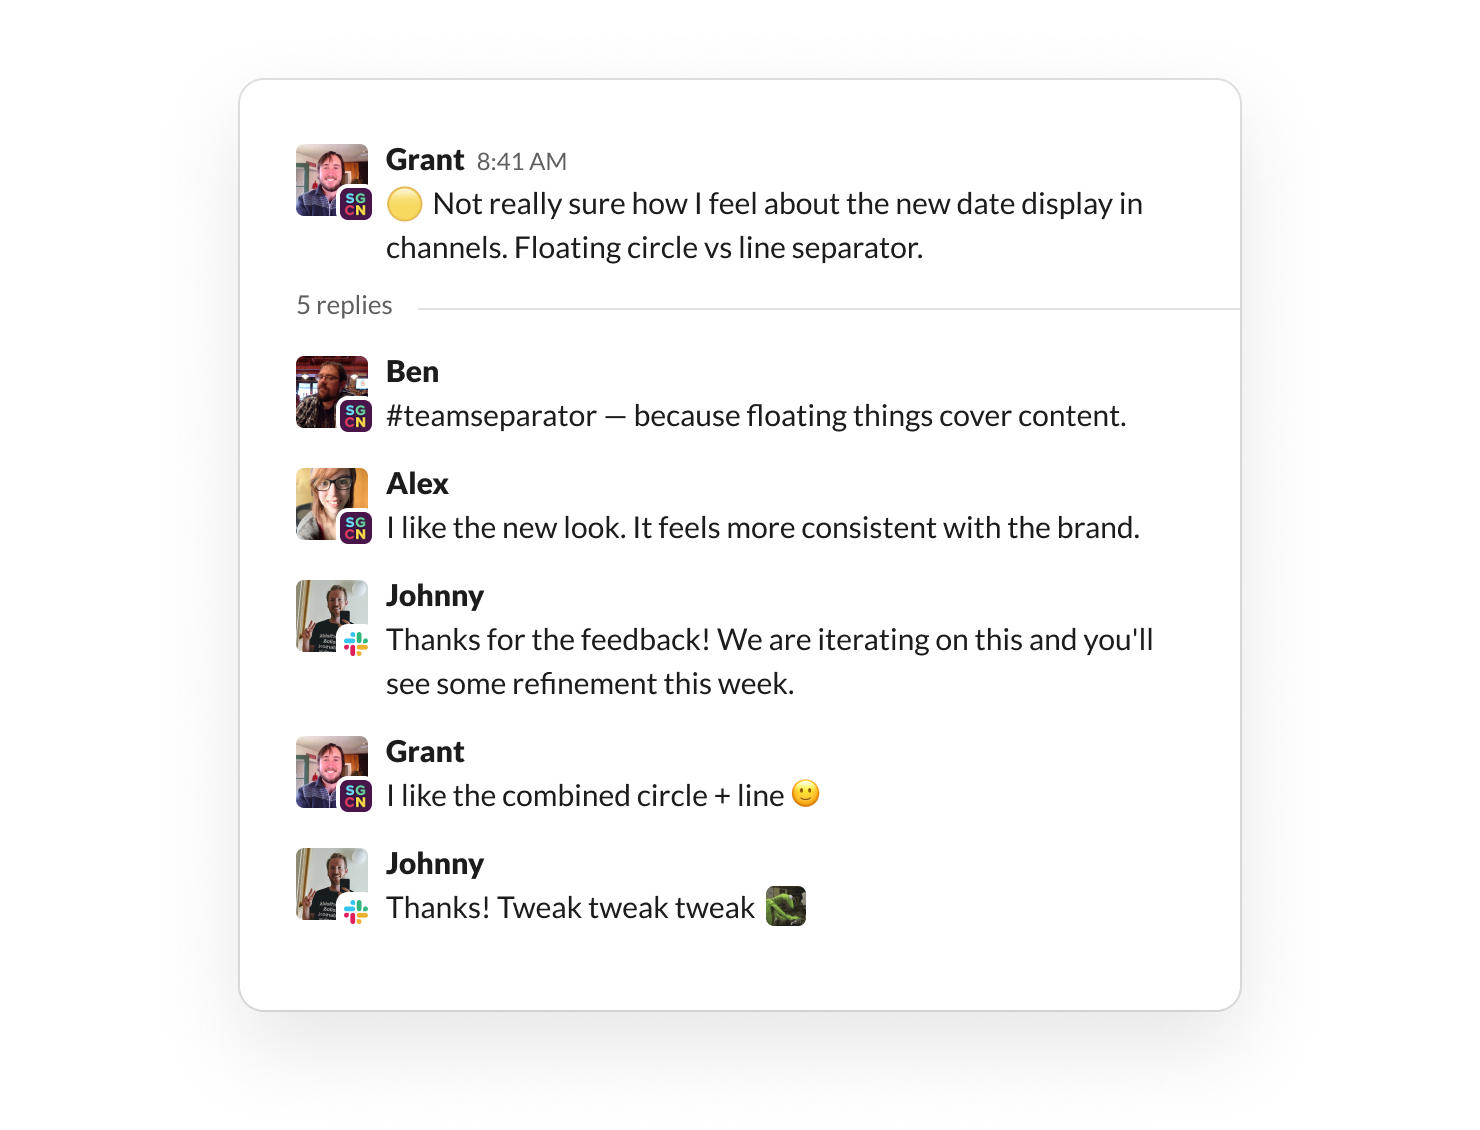 Pilot customers provide feedback in a shared Slack channel